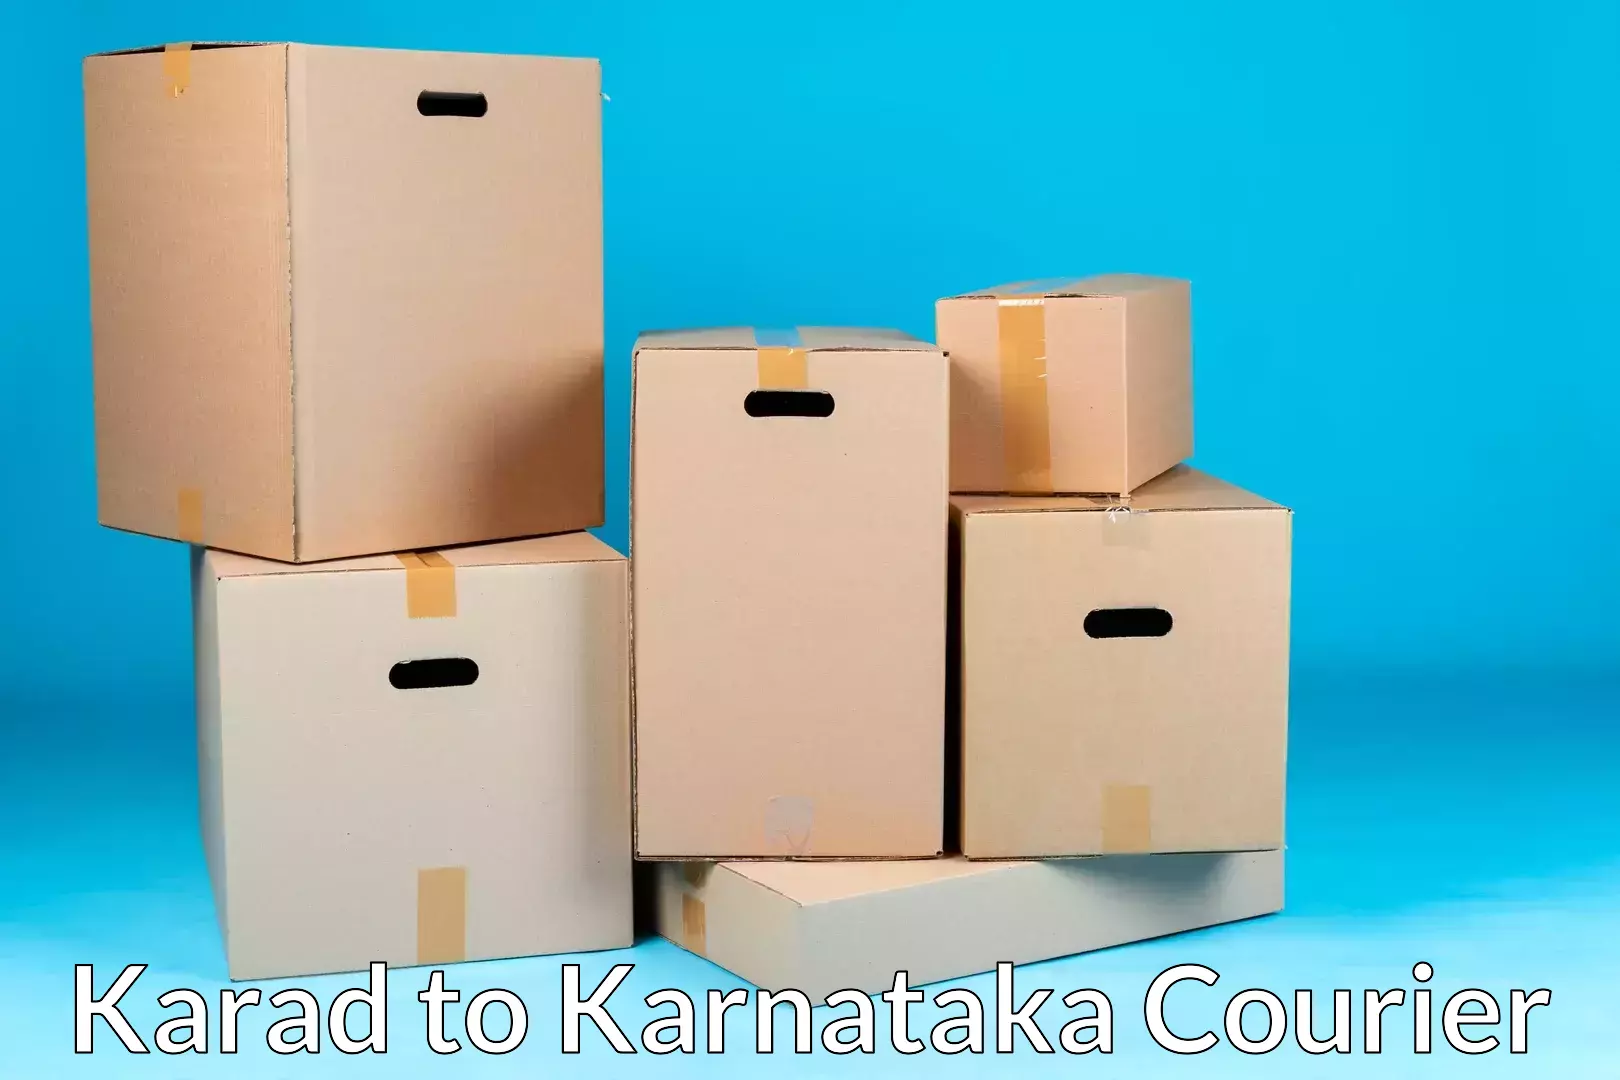 Trusted relocation experts Karad to Yadgir